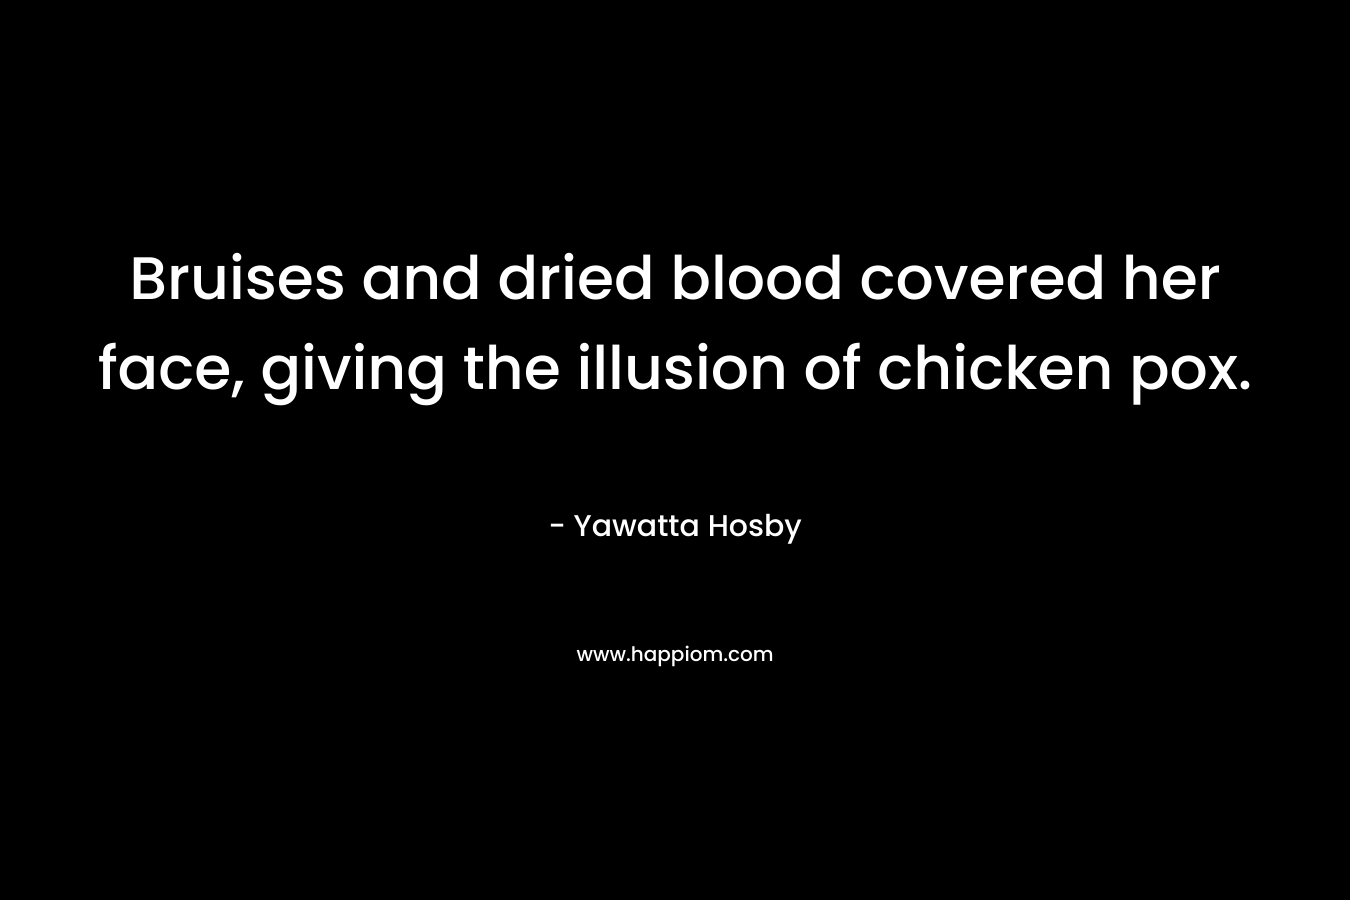 Bruises and dried blood covered her face, giving the illusion of chicken pox. – Yawatta Hosby